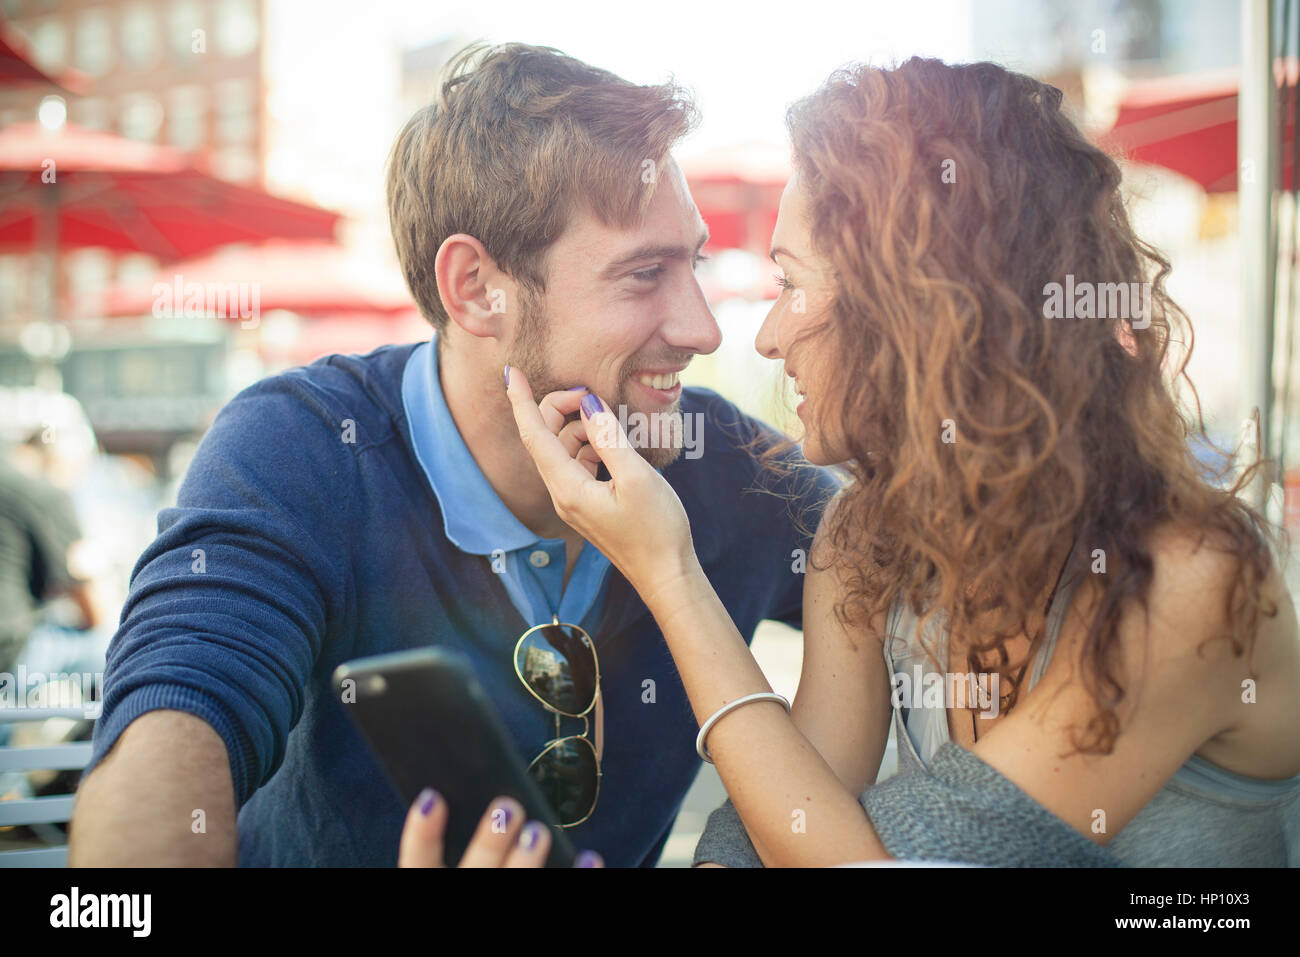 Affectionate couple sitting together outdoors Stock Photo